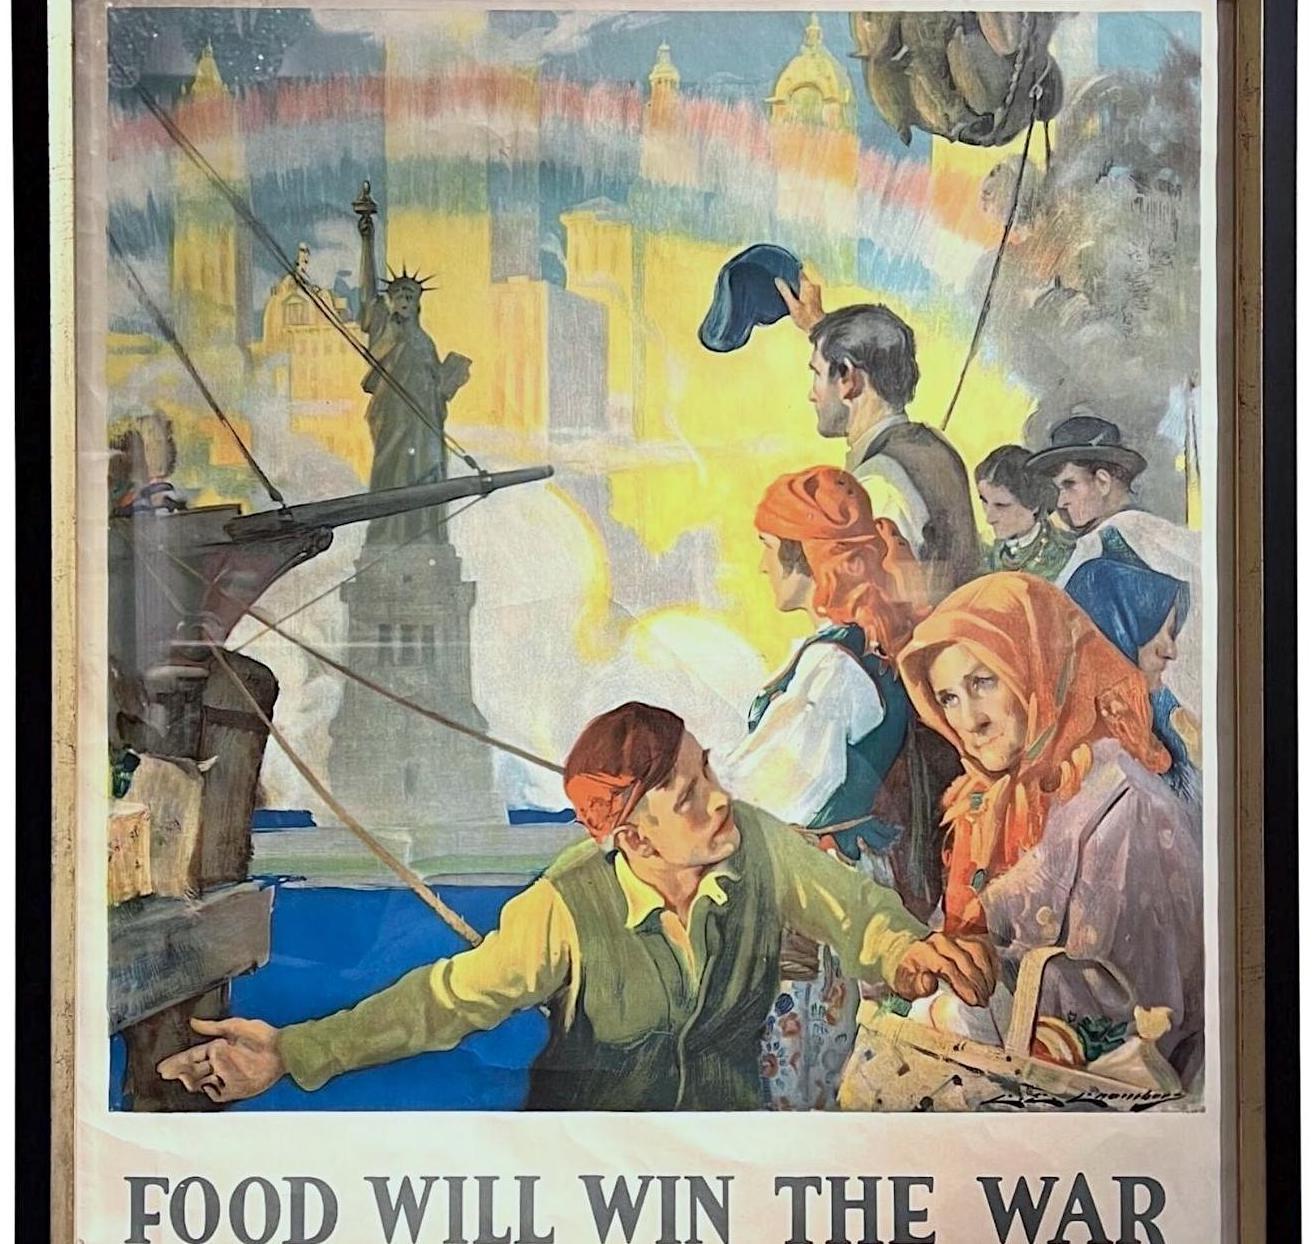 Presented is an original WWI United States Food Administration propaganda poster. This poster appeals to American immigrants, urging them to support the war effort through food conservation. The illustration depicts immigrants on the docks of Ellis